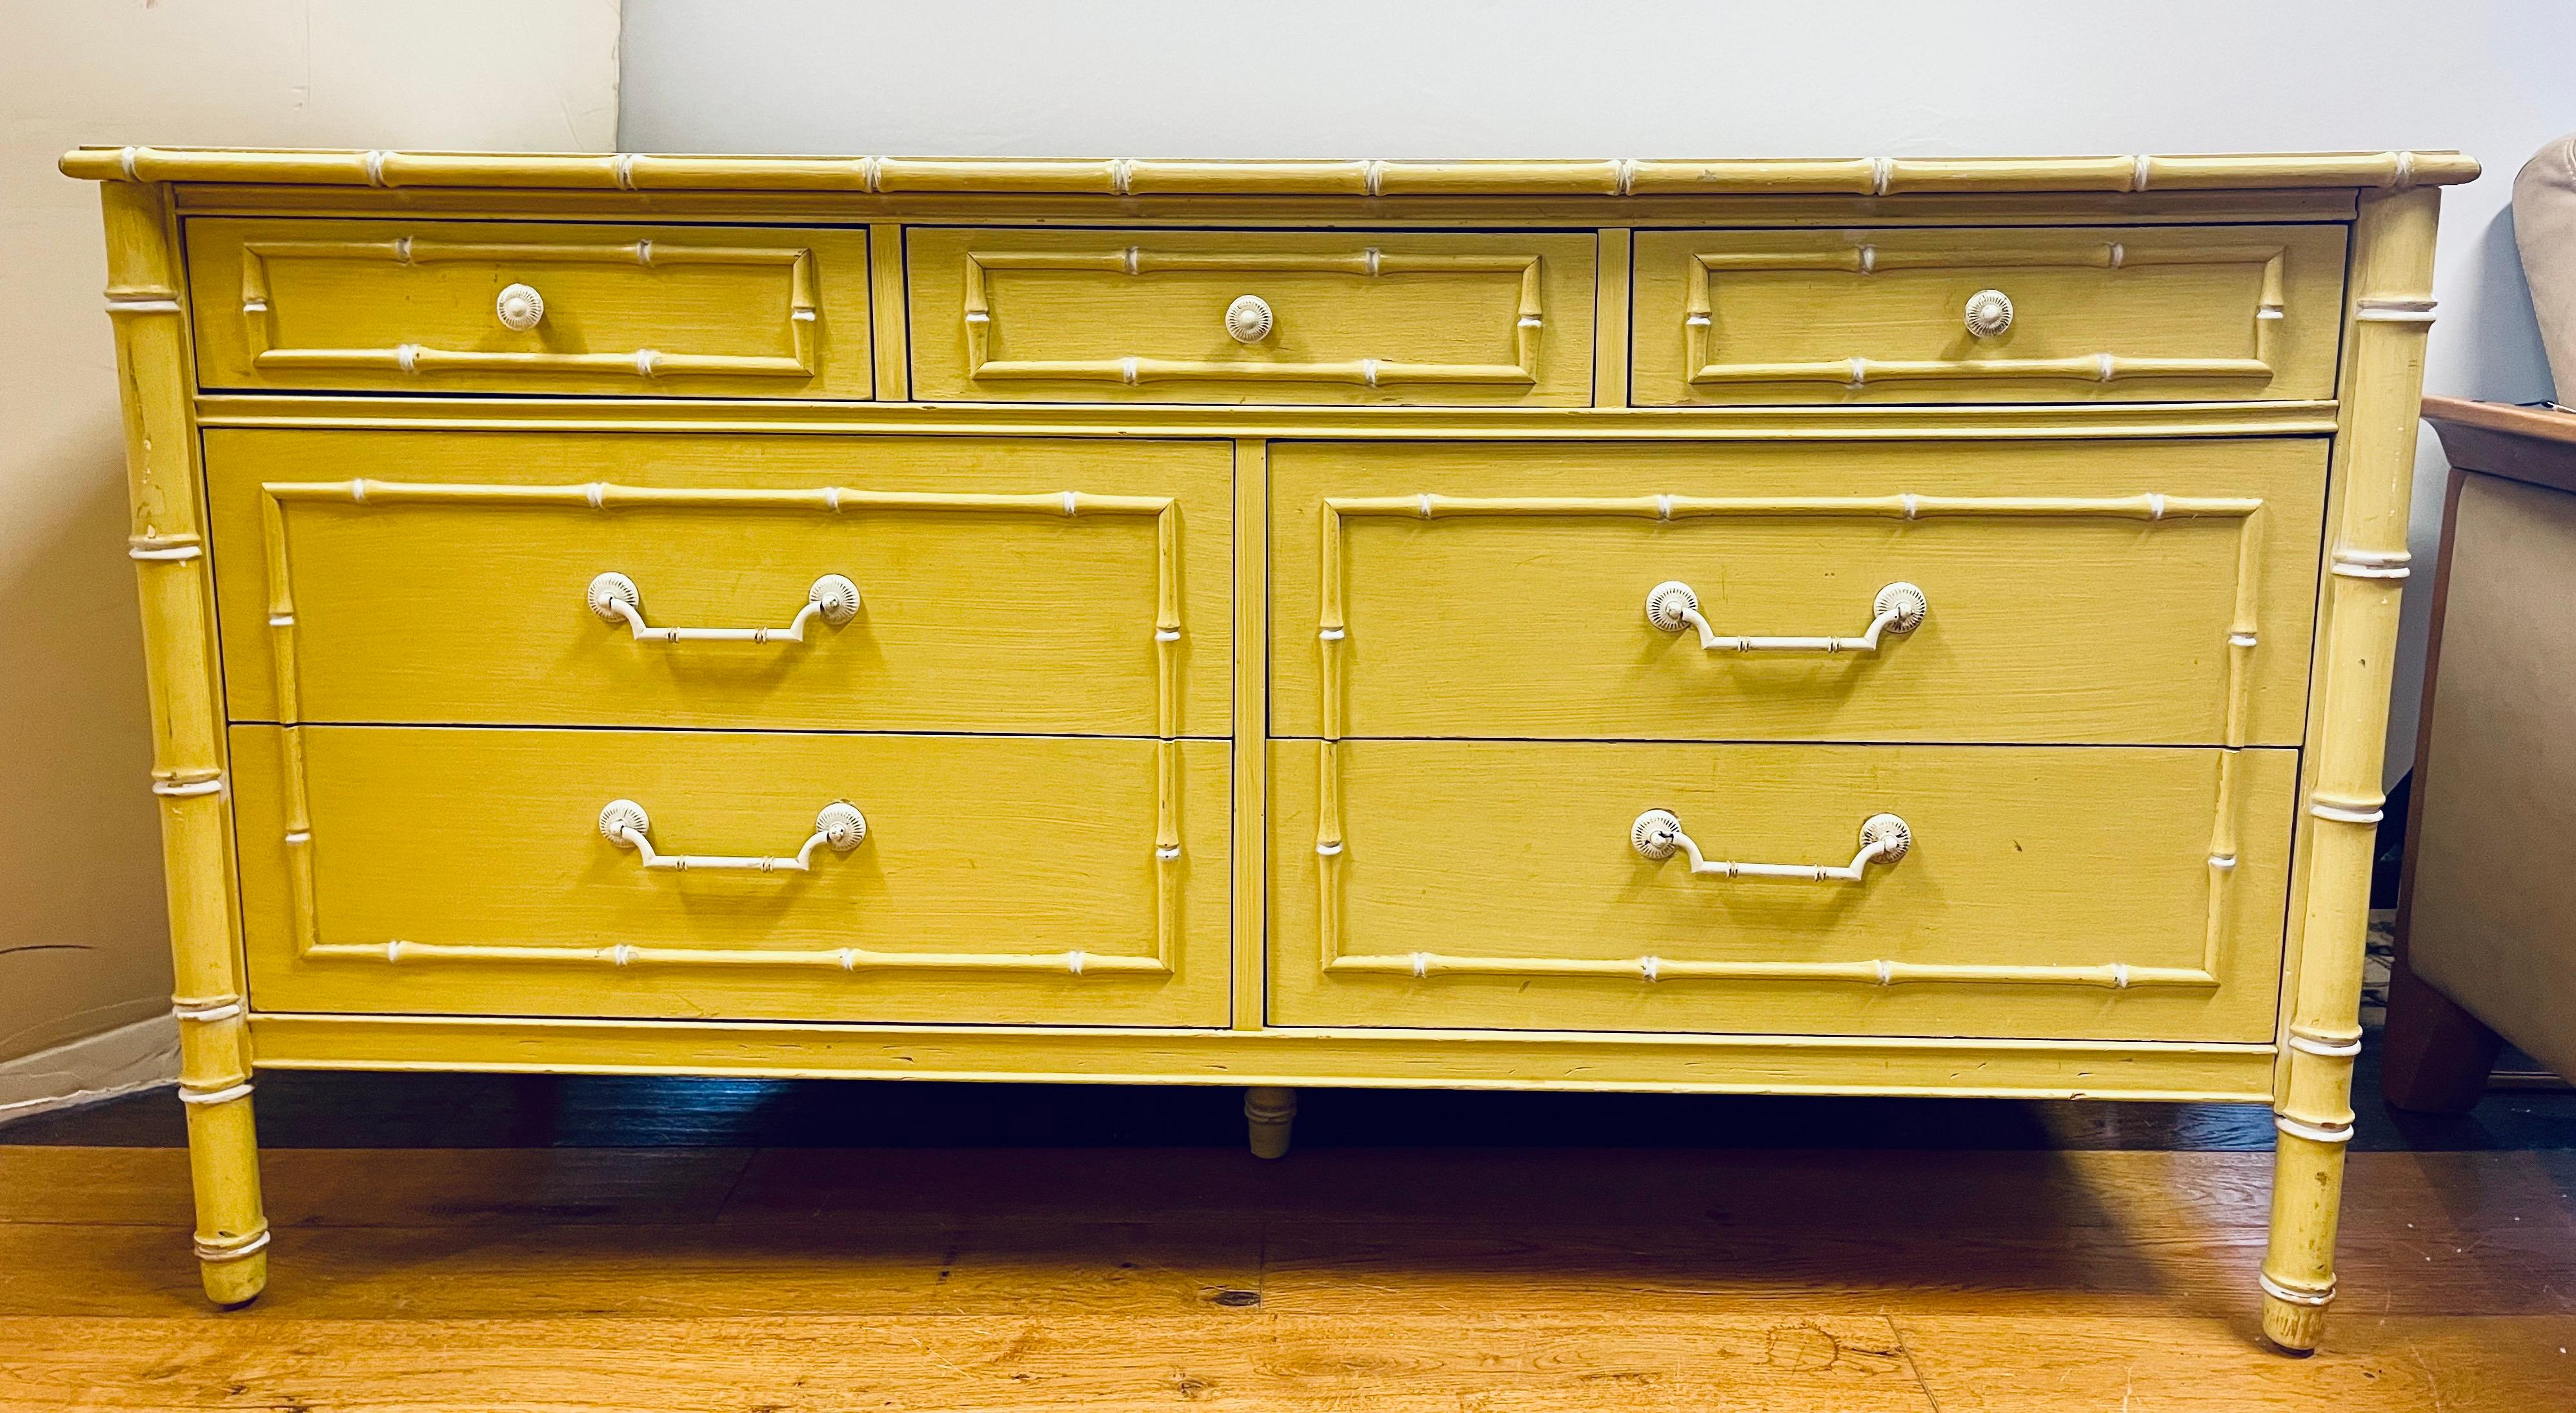 Rare and sought after yellow Thomasville's Allegro faux bamboo line from 1963 comes this seven drawer dresser with white laminate top.  Gorgeous!